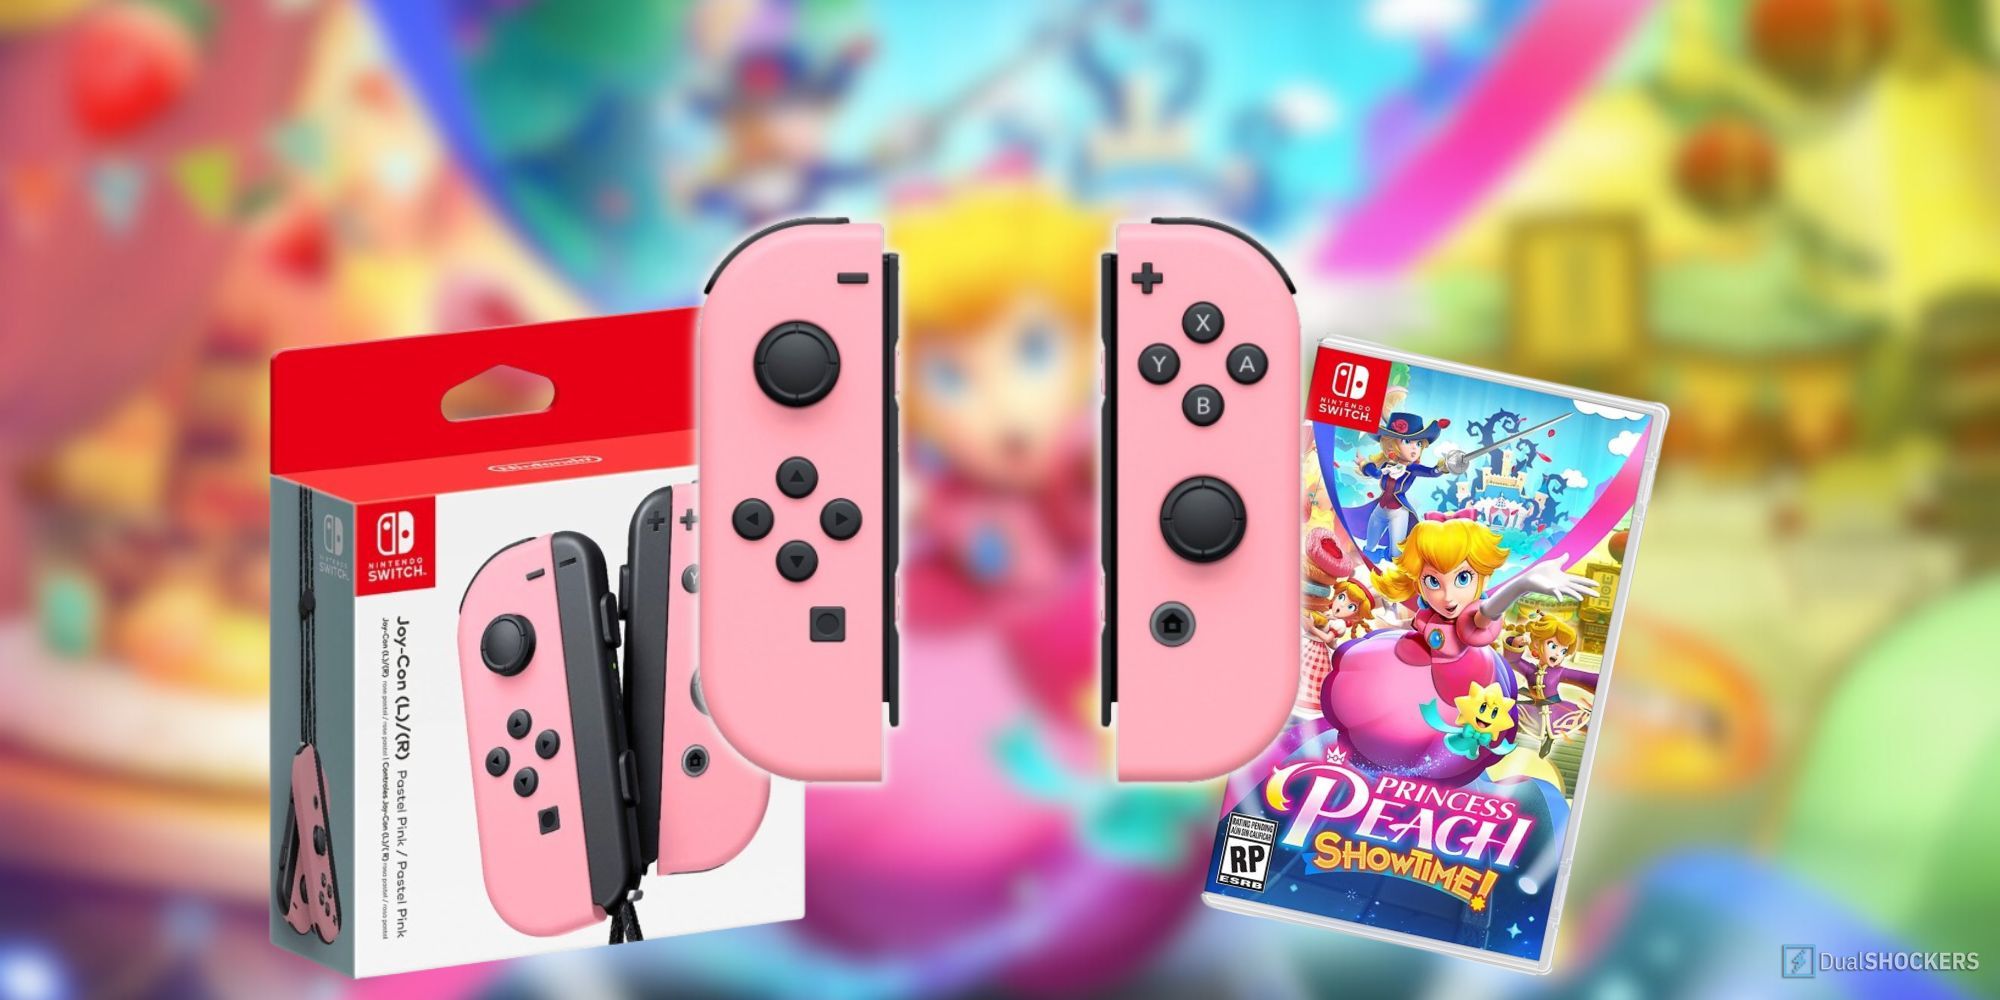 Feature image shows Nintendo's Pastel Pink Joy-Cons, the controller box, and the case for Princess Peach: Showtime.